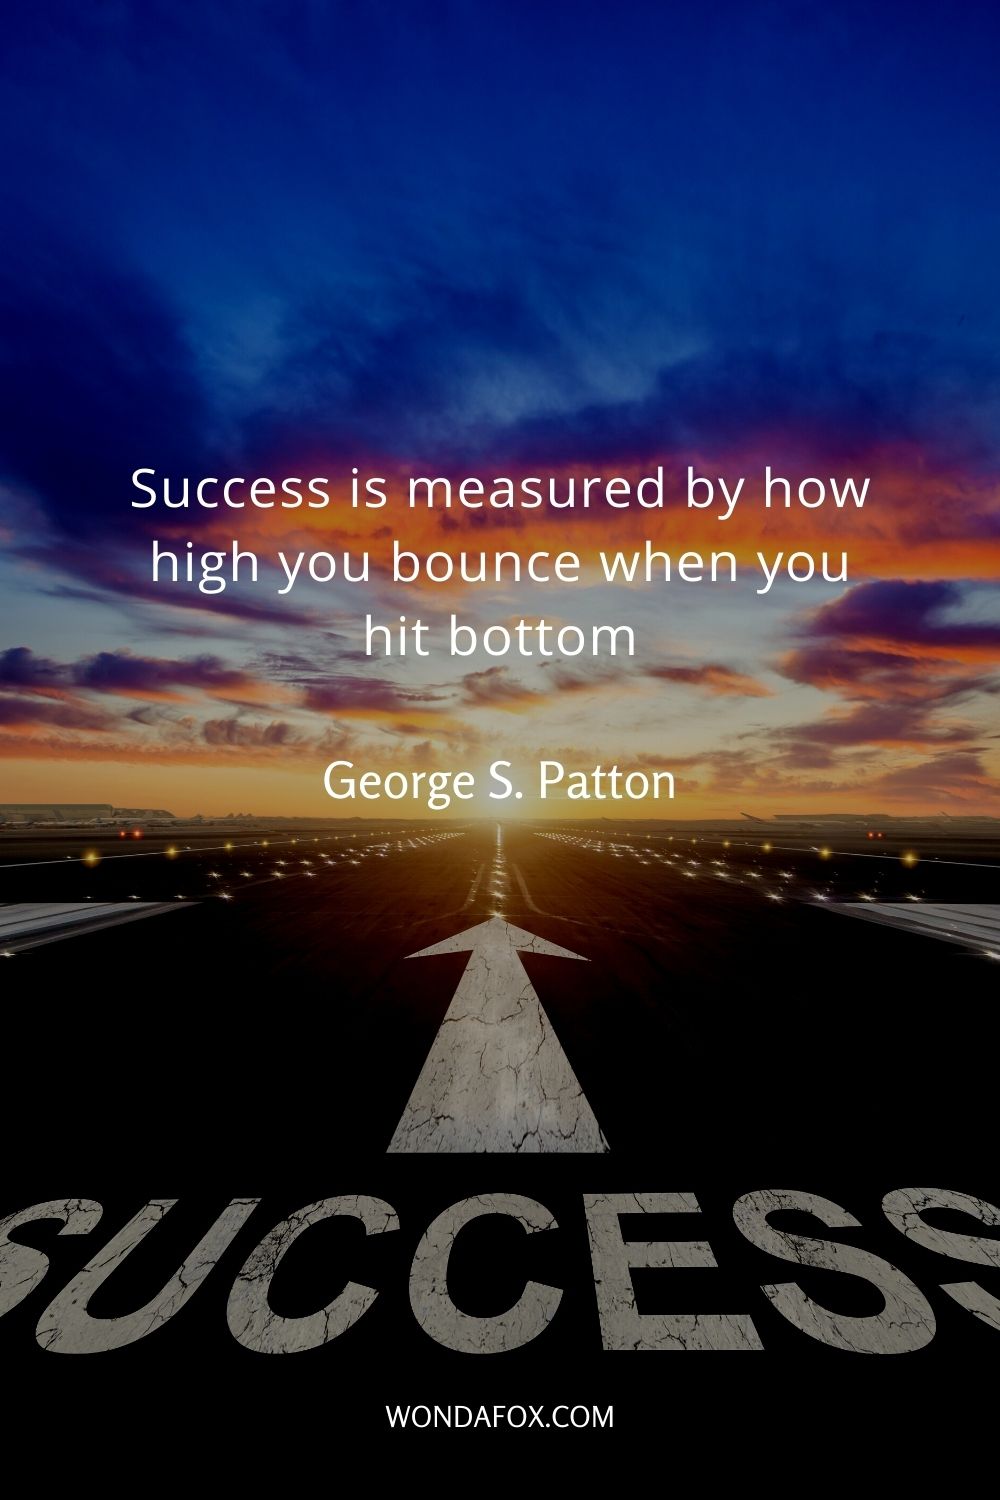 Success is measured by how high you bounce when you hit bottom